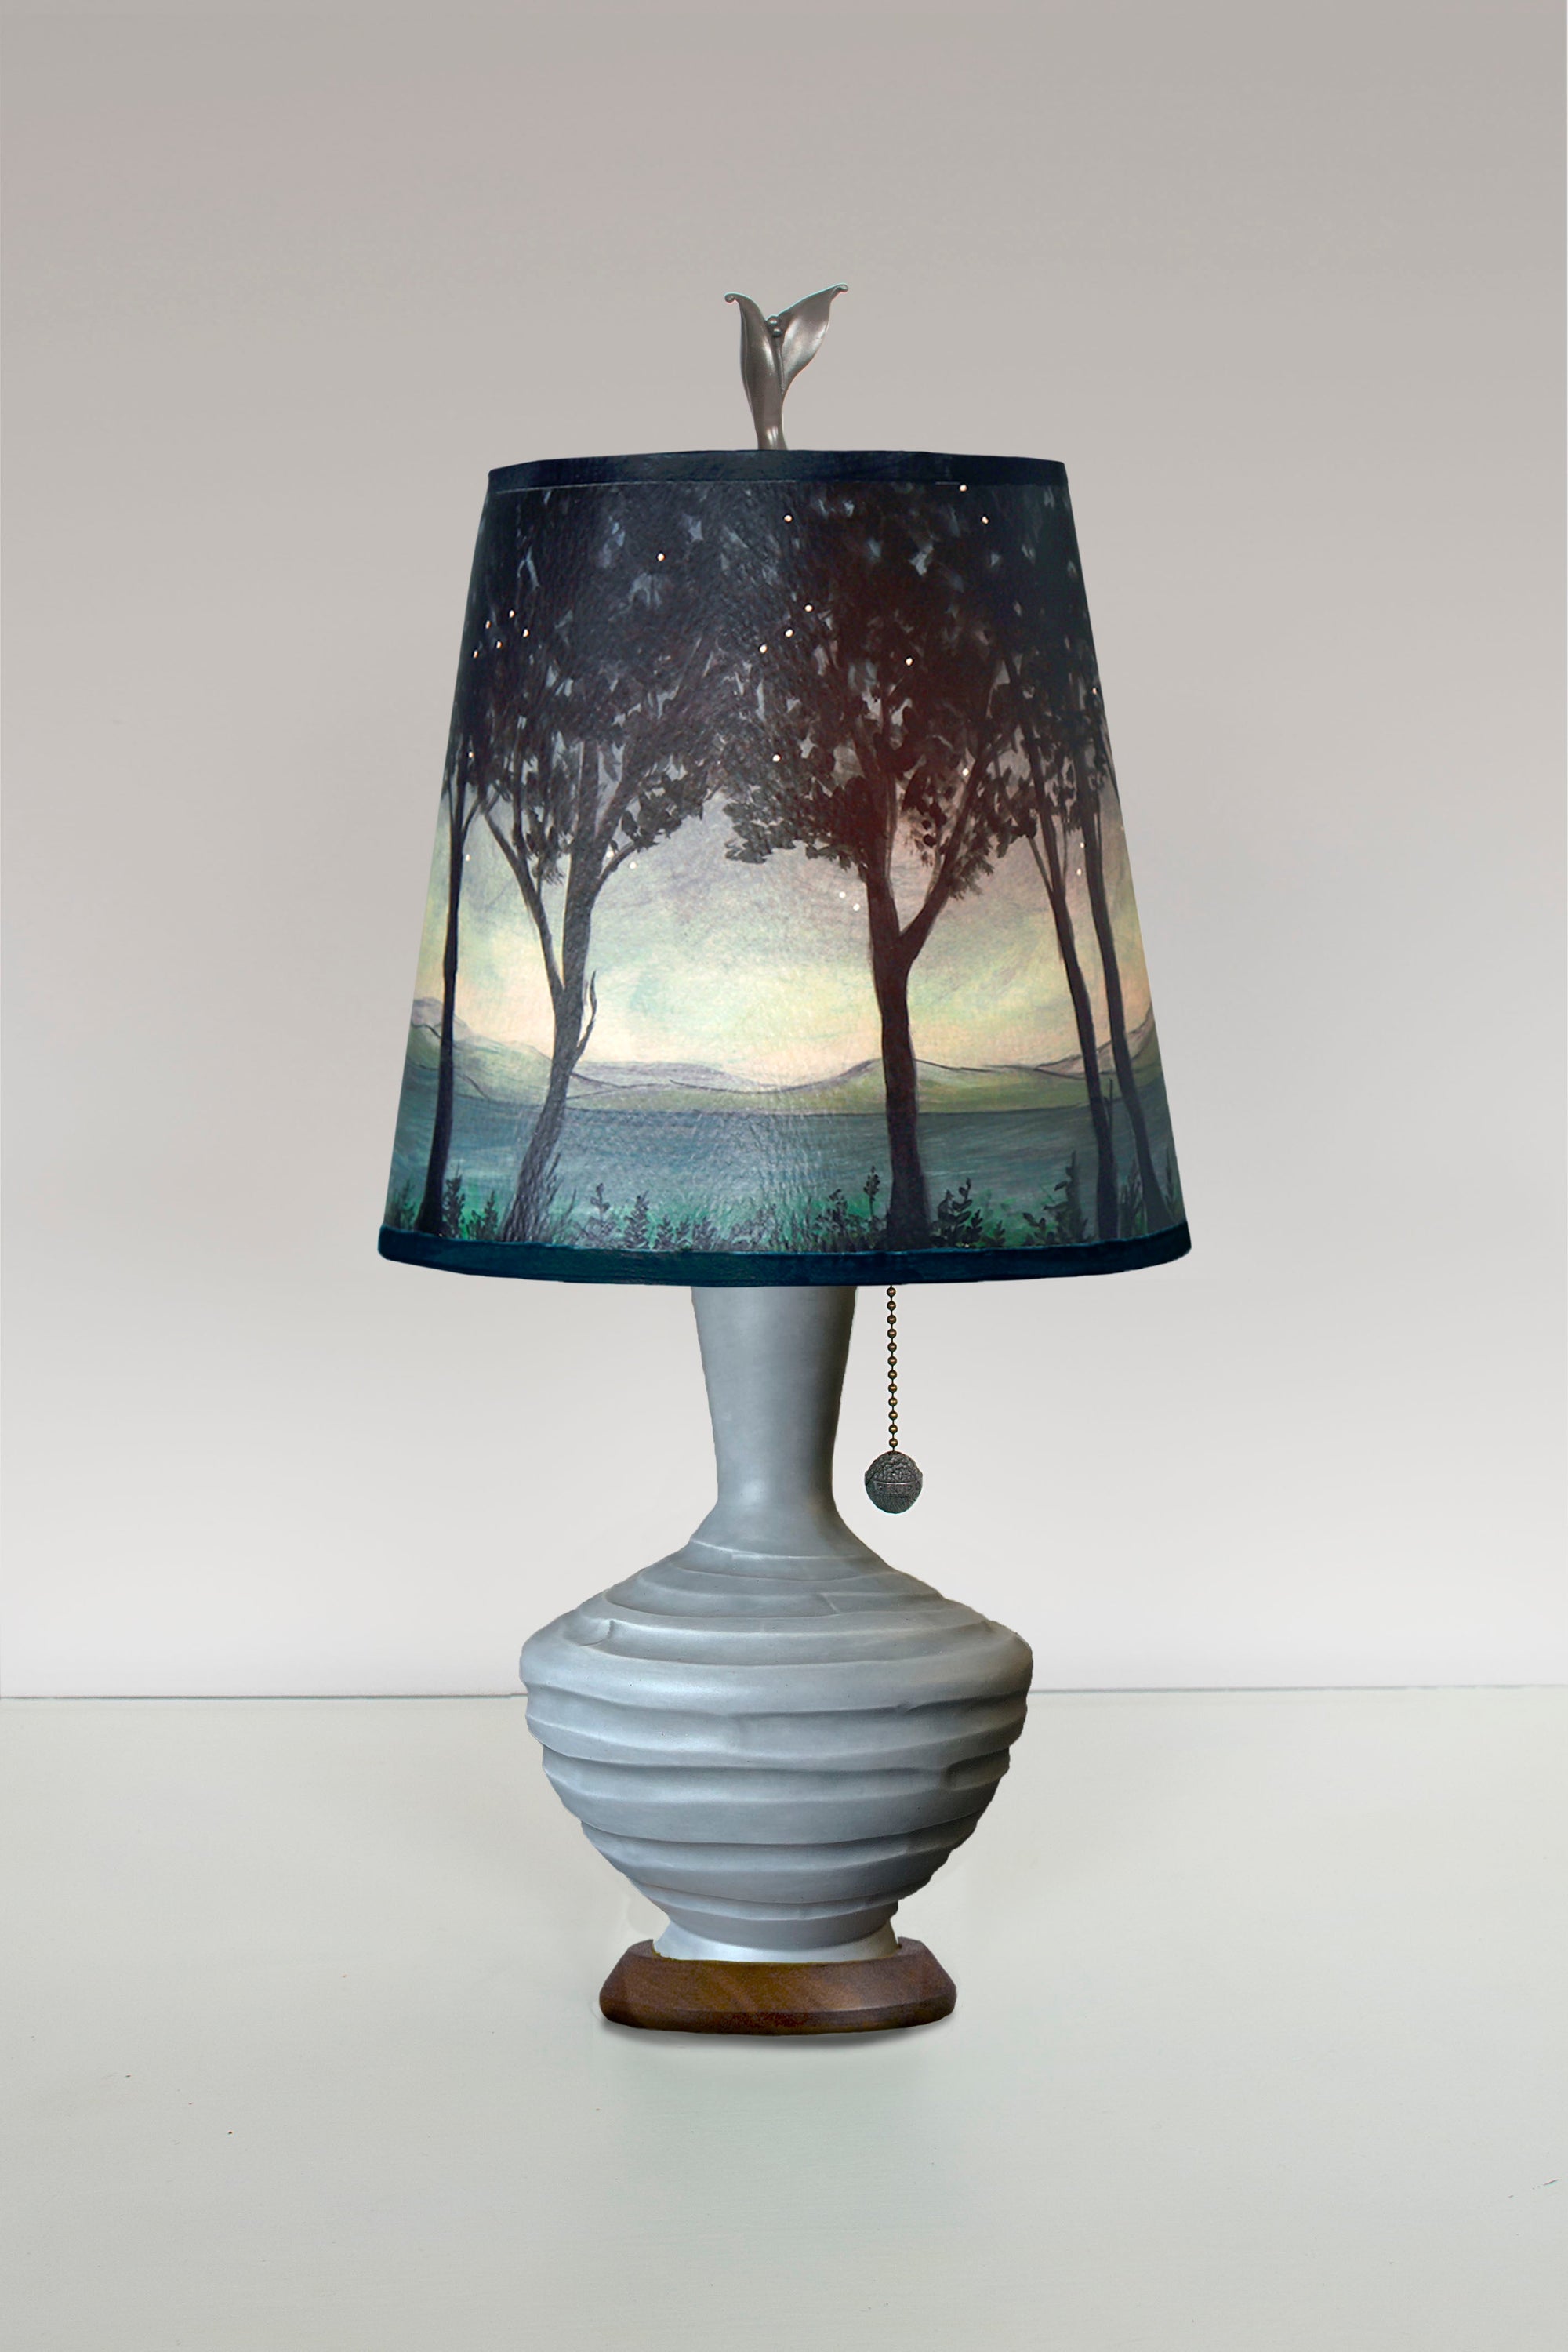 Janna Ugone & Co Table Lamps Ceramic Table Lamp with Small Drum Shade in Twilight